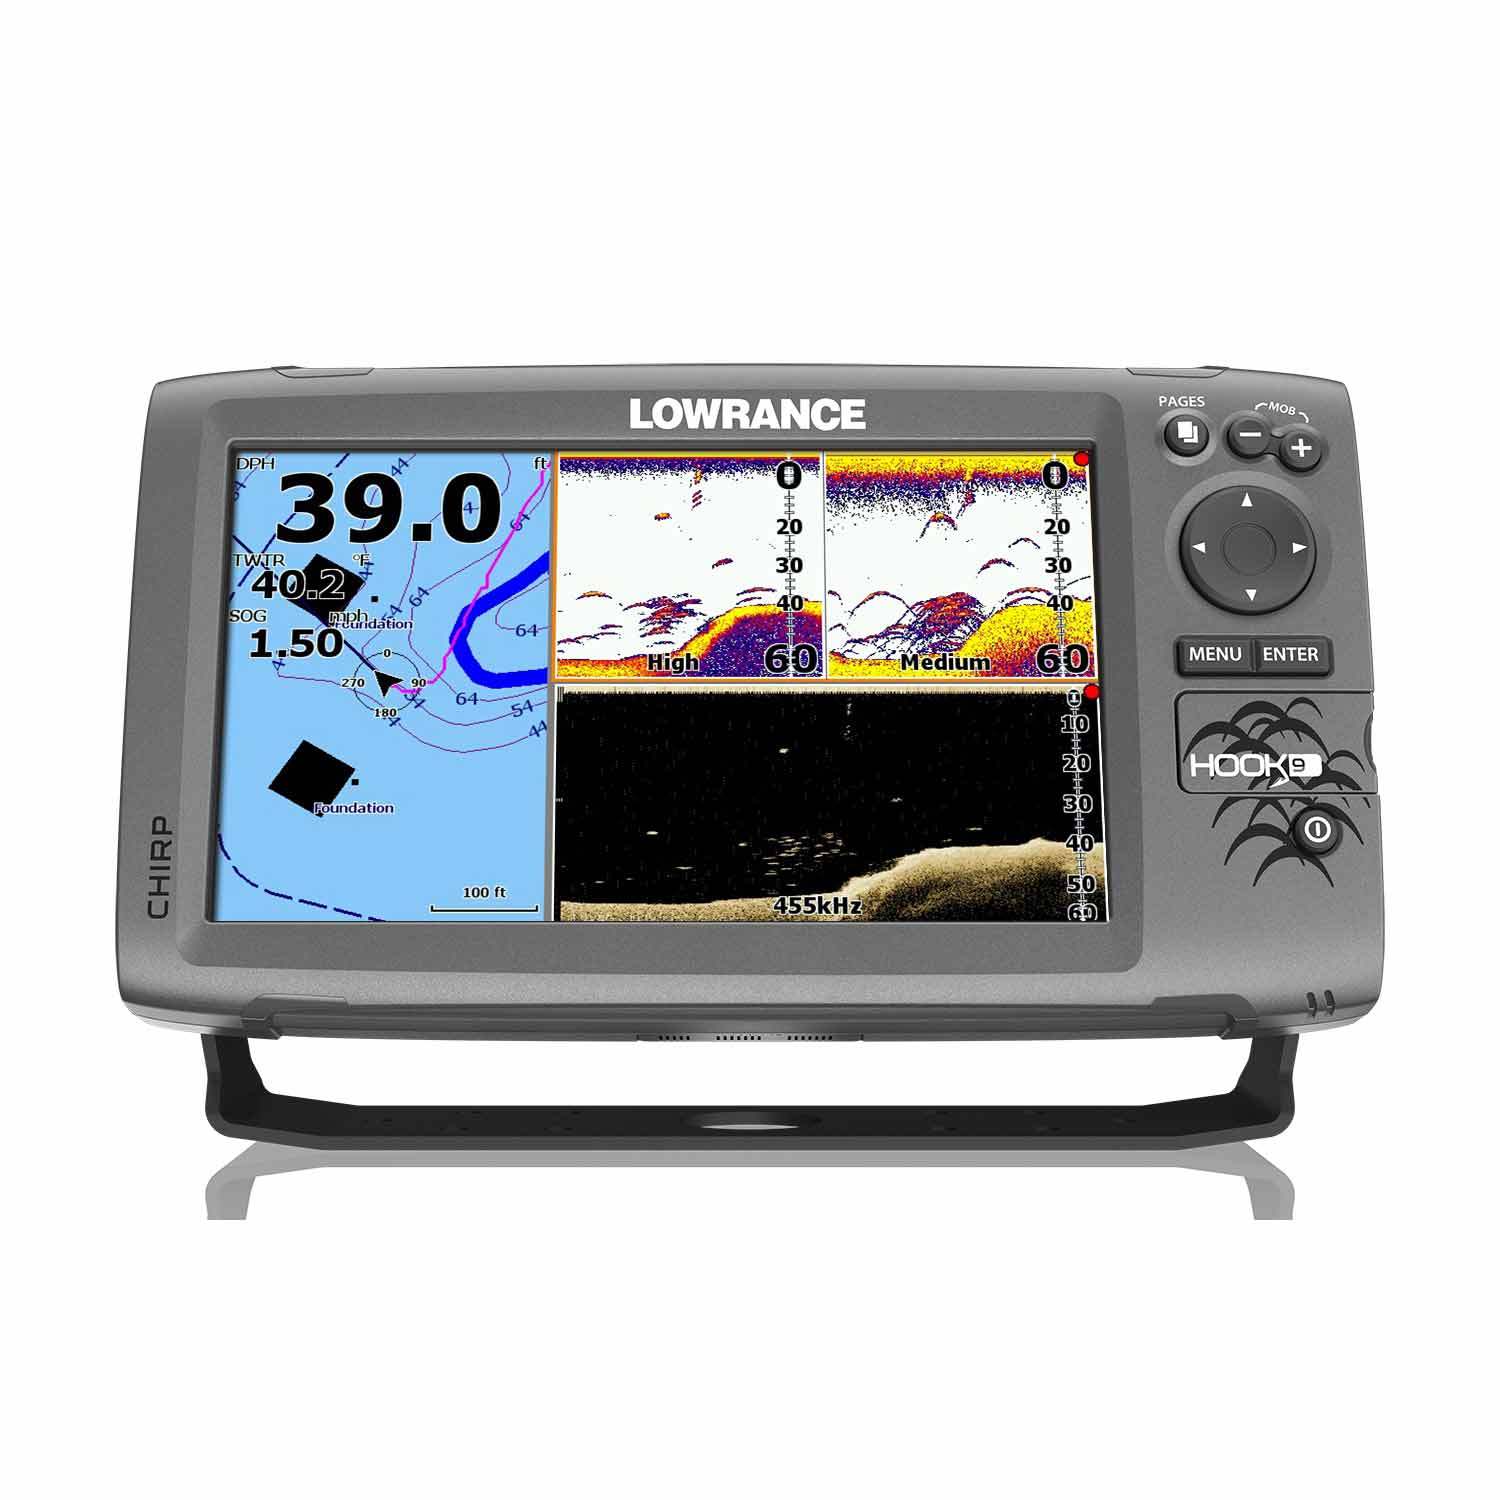 Lowrance HOOK-5 user manual (English - 60 pages)